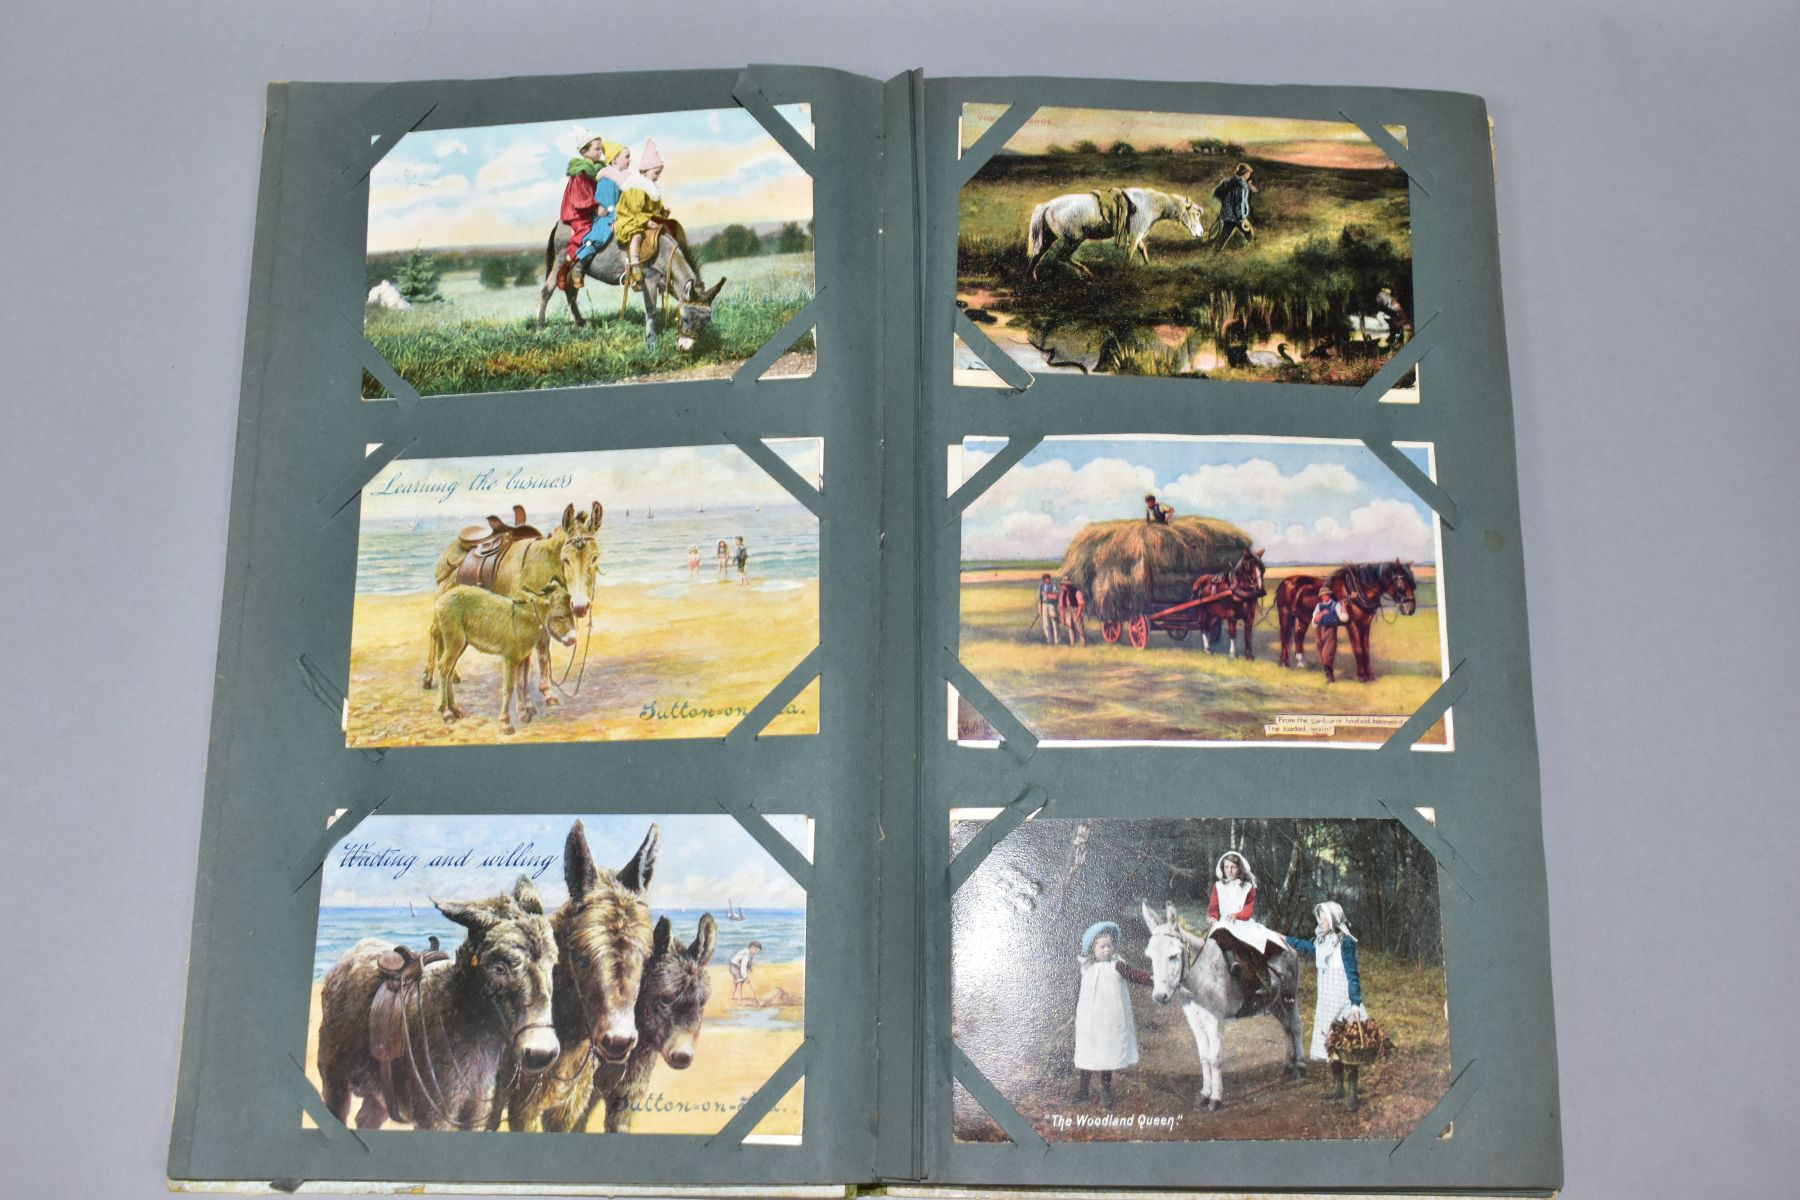 POSTCARDS, approximately 133 Postcards in one album of equine related cards, early-mid 20th century, - Image 4 of 8